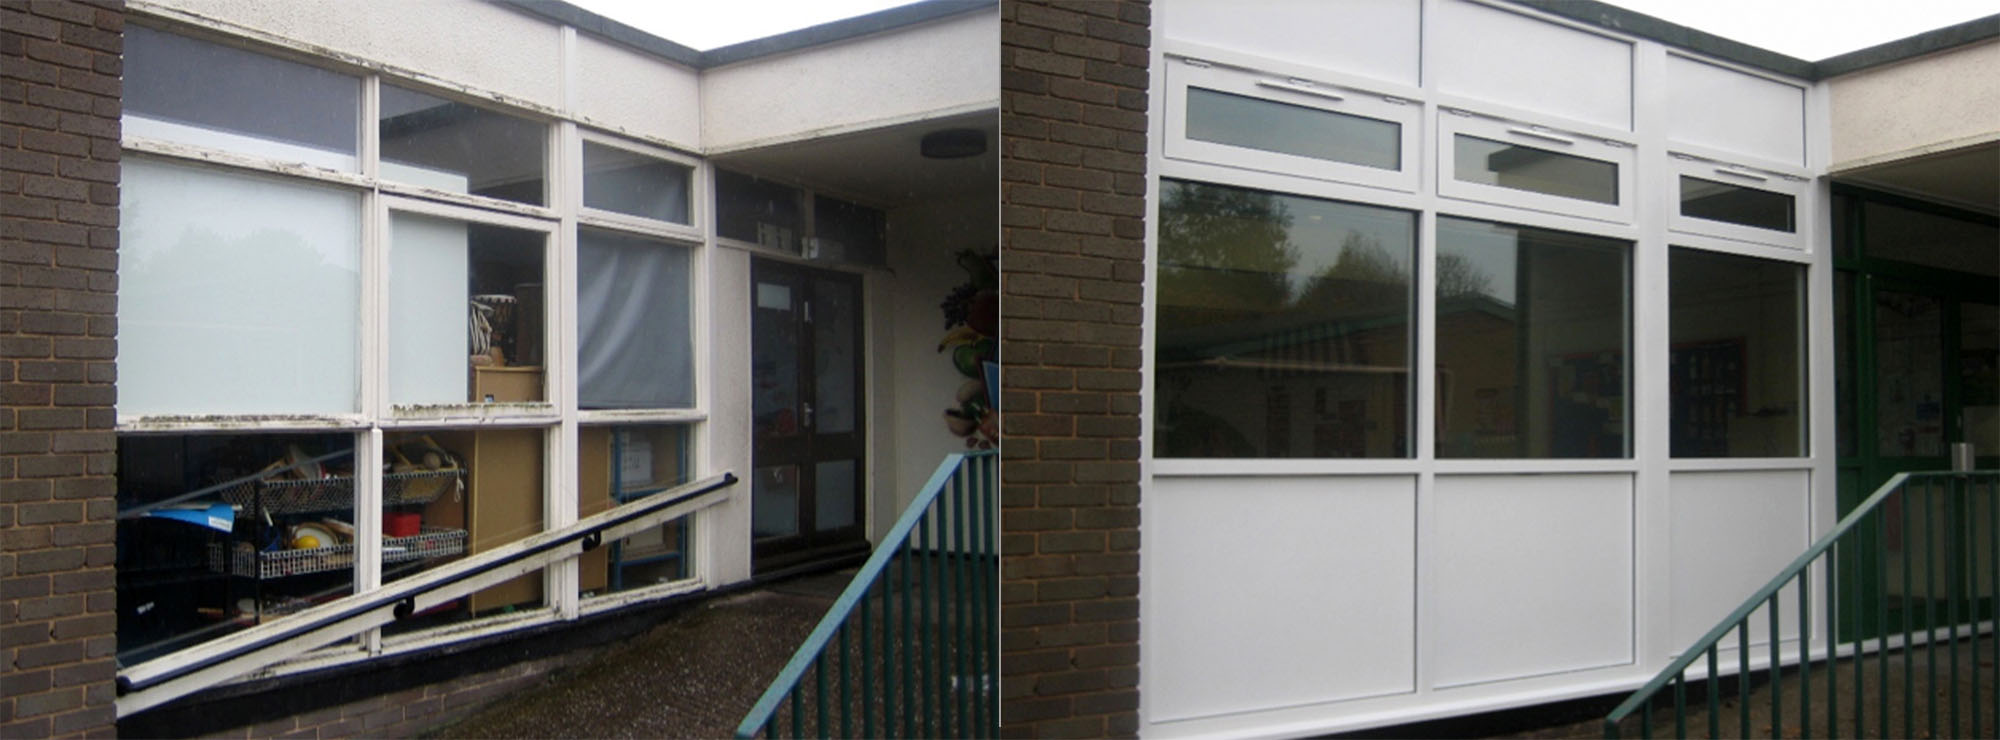 <strong>Infants & Junior School in West Midlands.</strong>Replacement timber windows with white commercial aluminium.